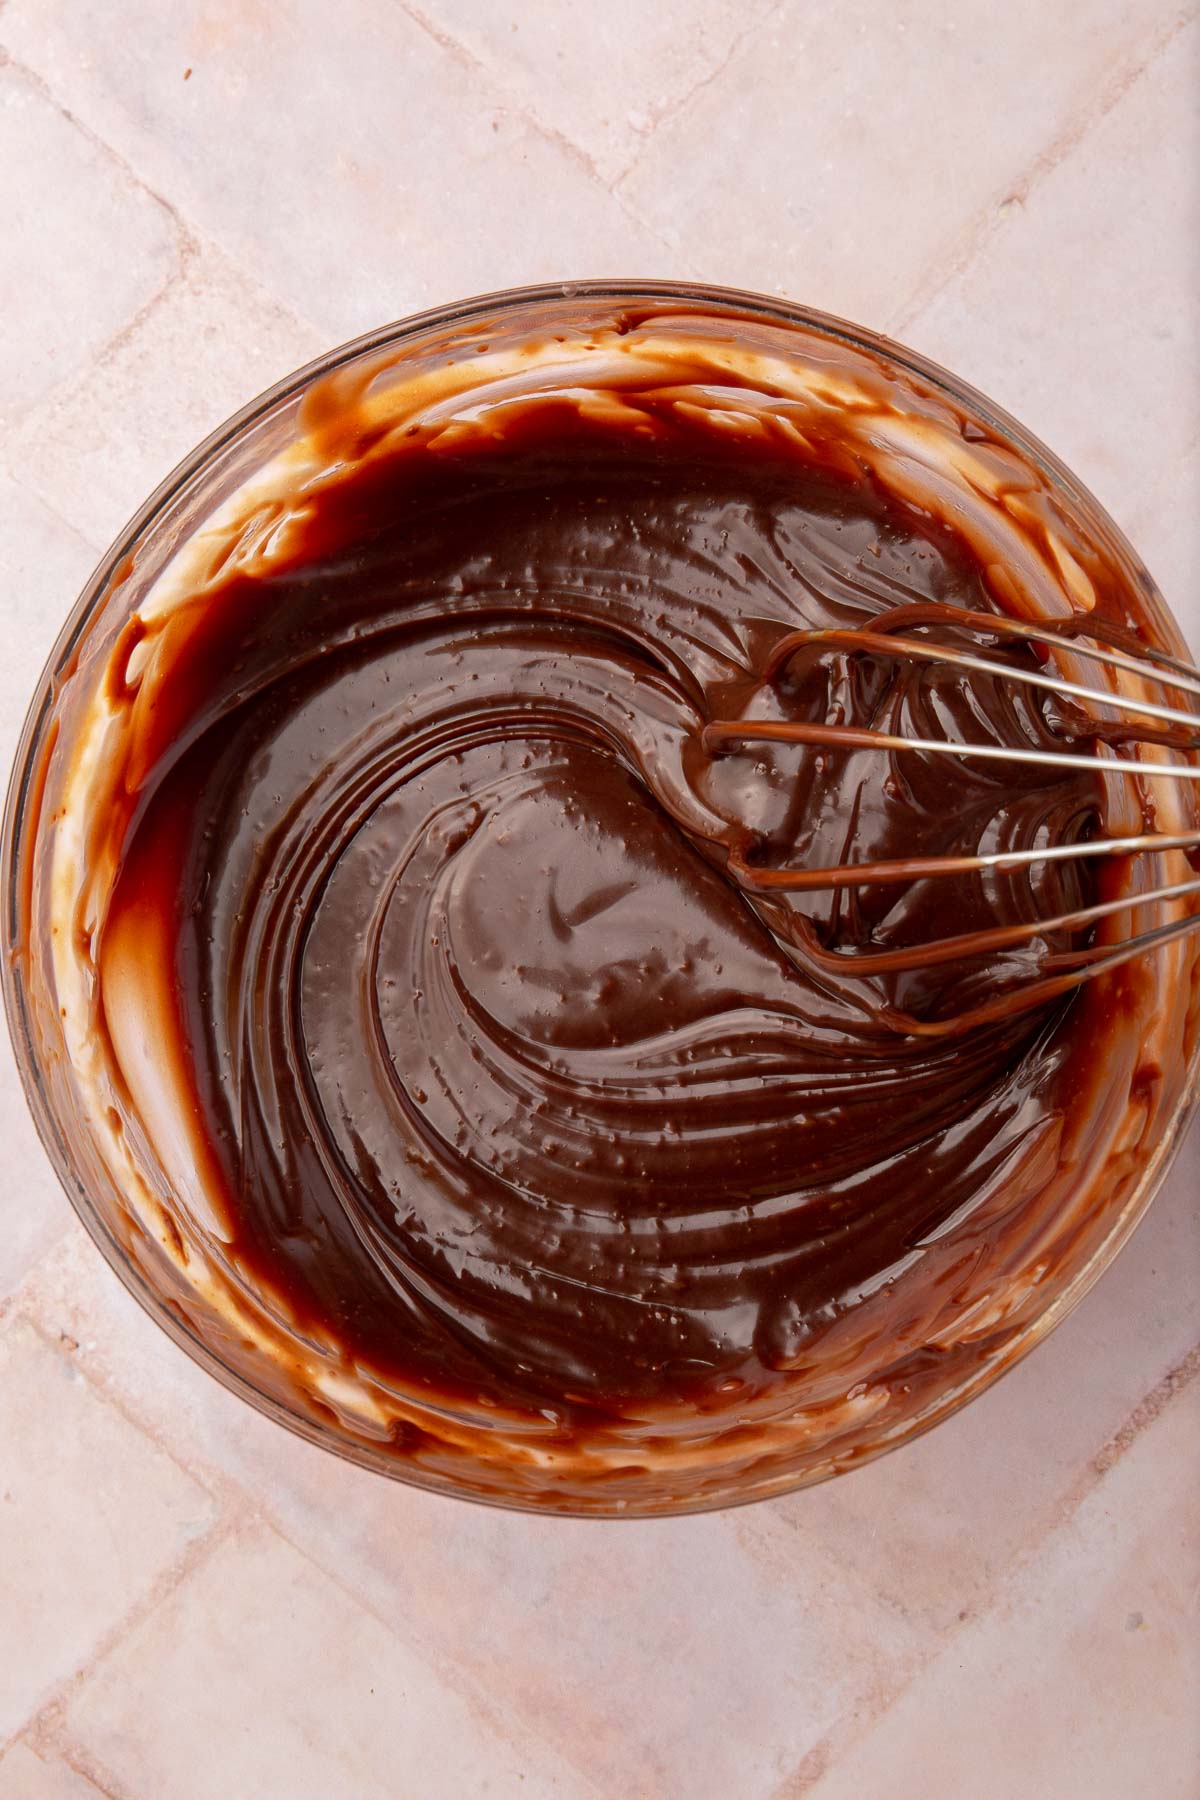 A close up shot of Nutella ganache being whisked with a wire whisk in a glass mixing bowl.